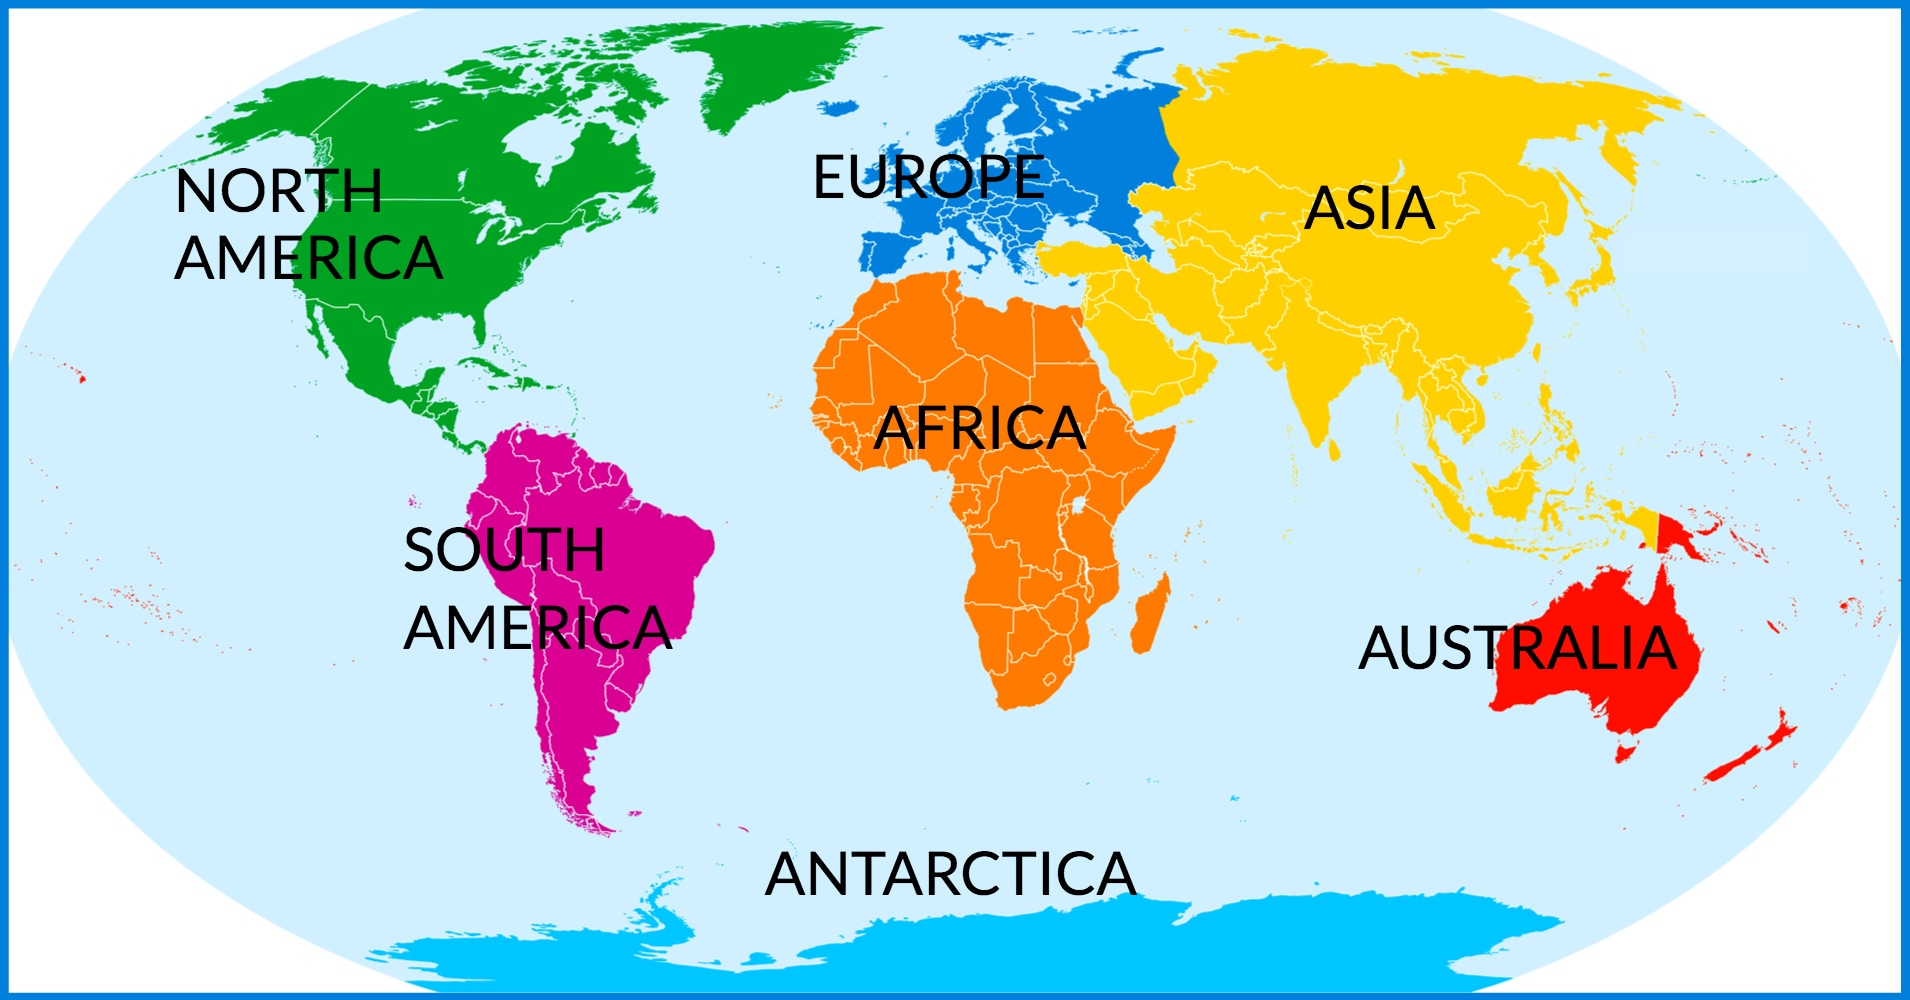 seven-continents-question-1-which-is-the-biggest-continent